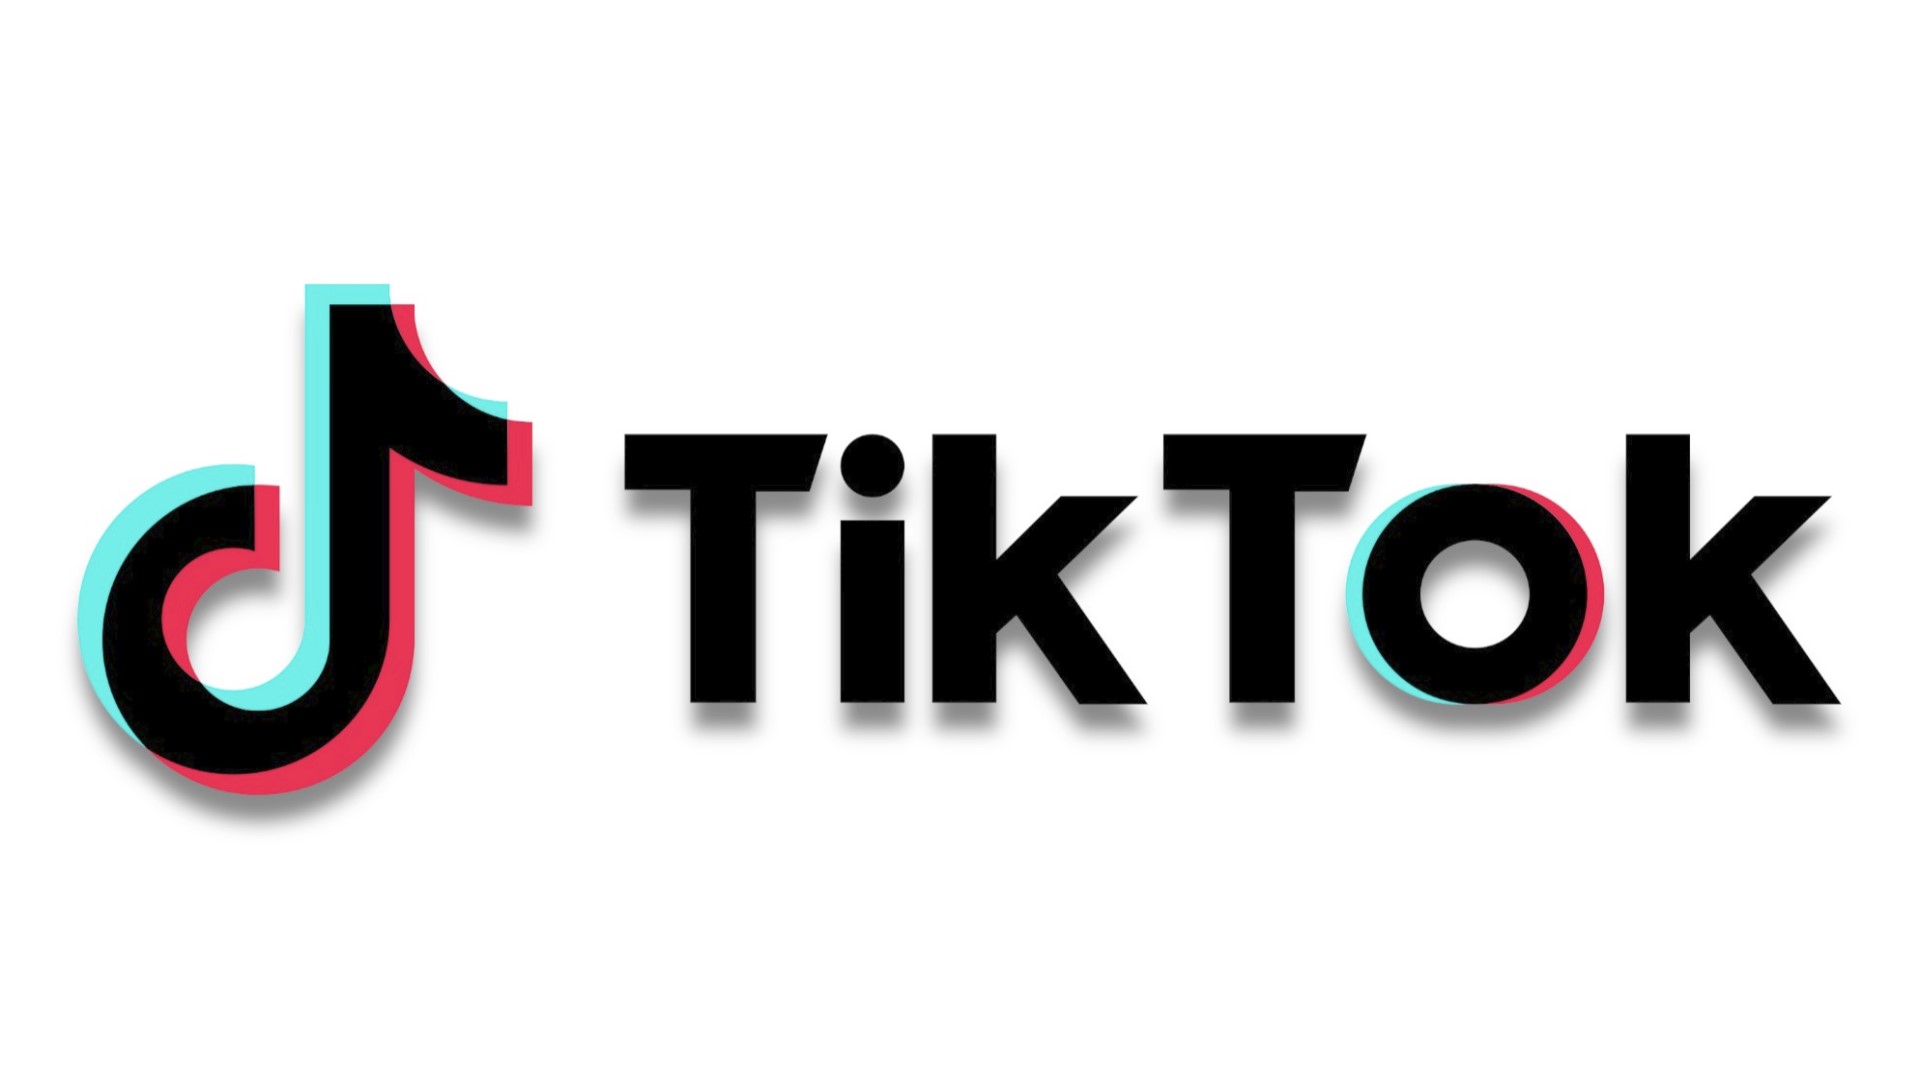 Microsoft is in talks not only with TikTok on buying it, but also the Trump administration which is seeking to ban the popular video app in the U.S. Veuer's Justin Kircher has more.